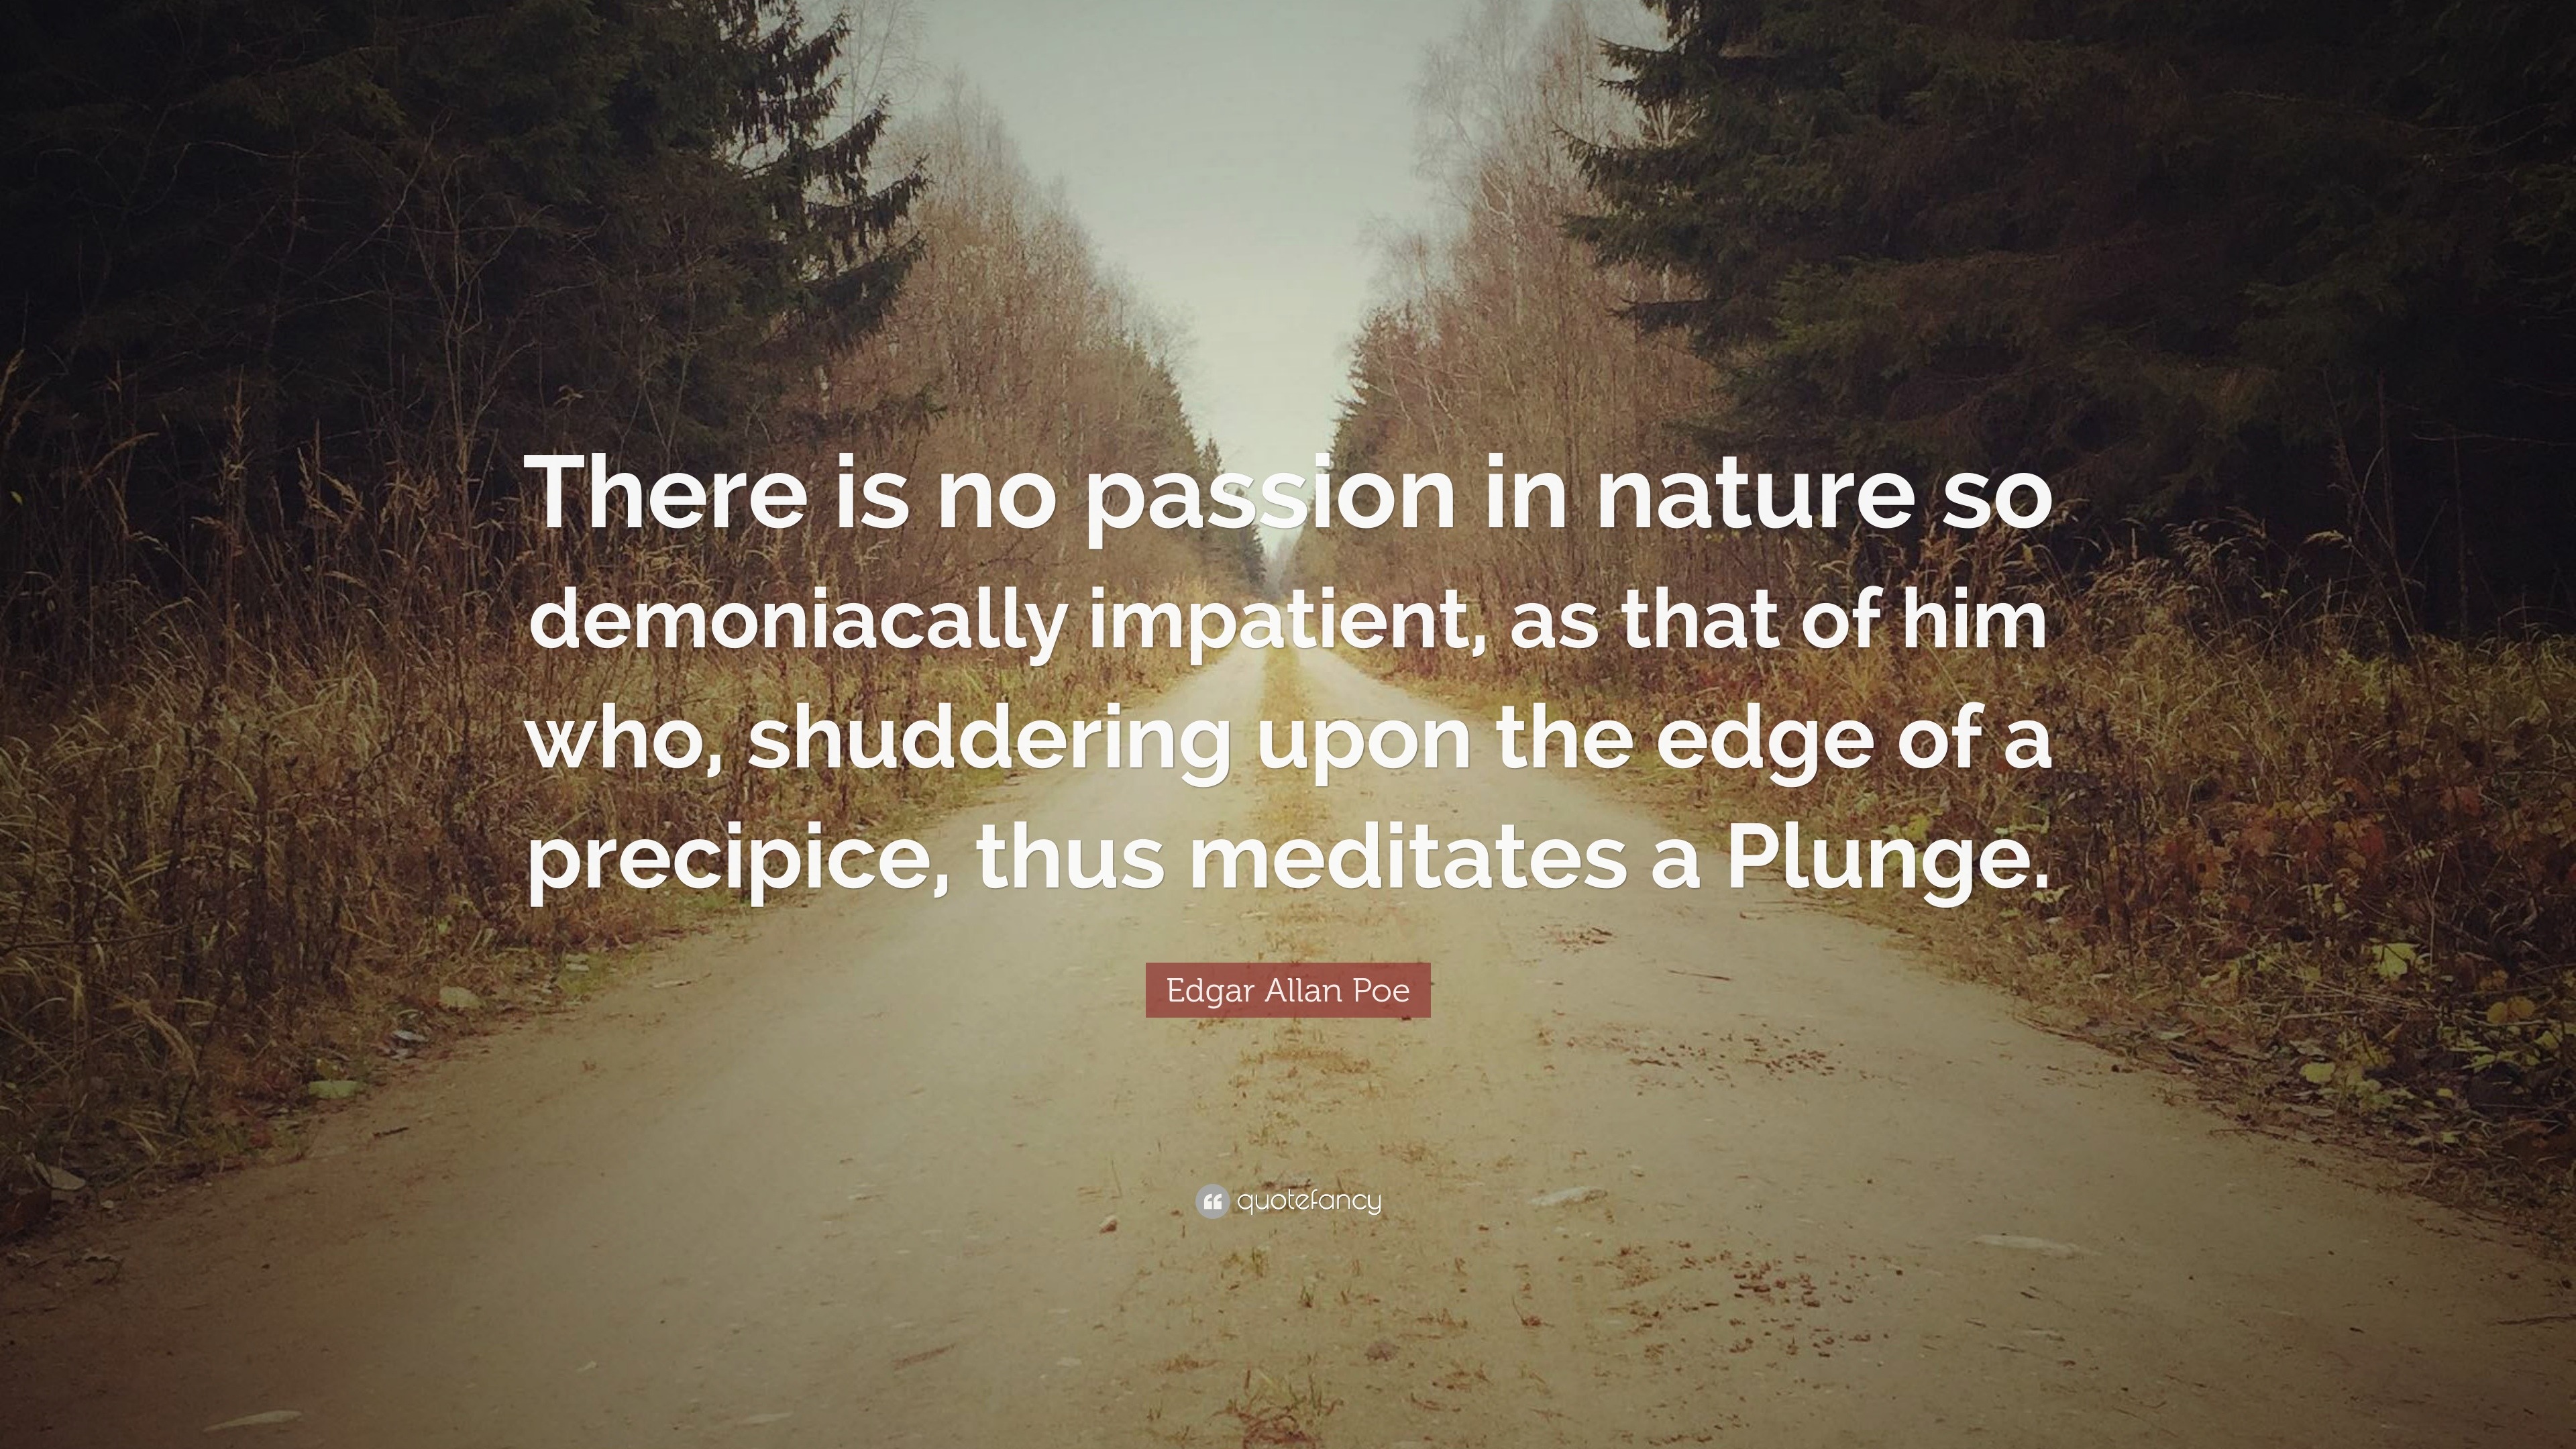 Edgar Allan Poe Quote: “There is passion in nature so demoniacally impatient, as that of him who, shuddering upon the edge of a precipice, th...”